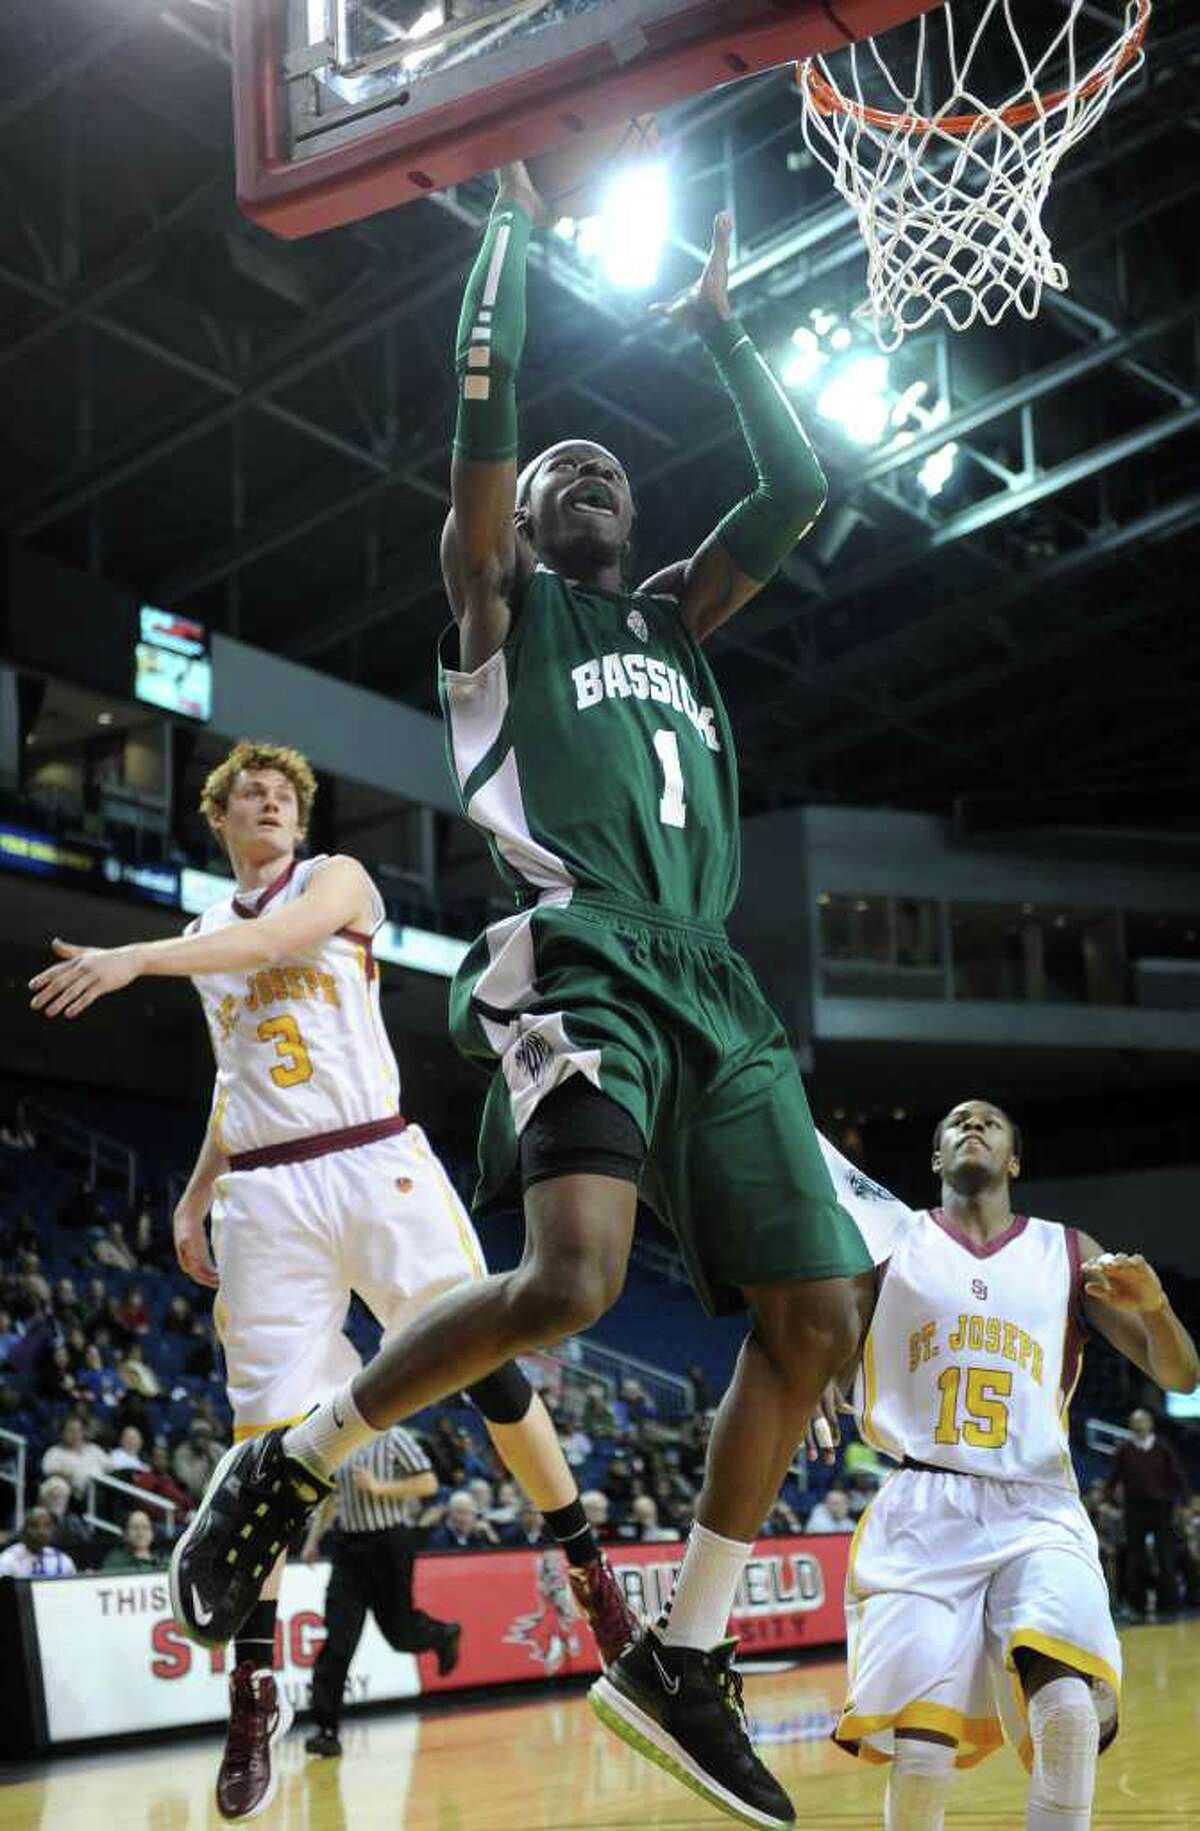 St. Joseph outlasts Bassick at Arena